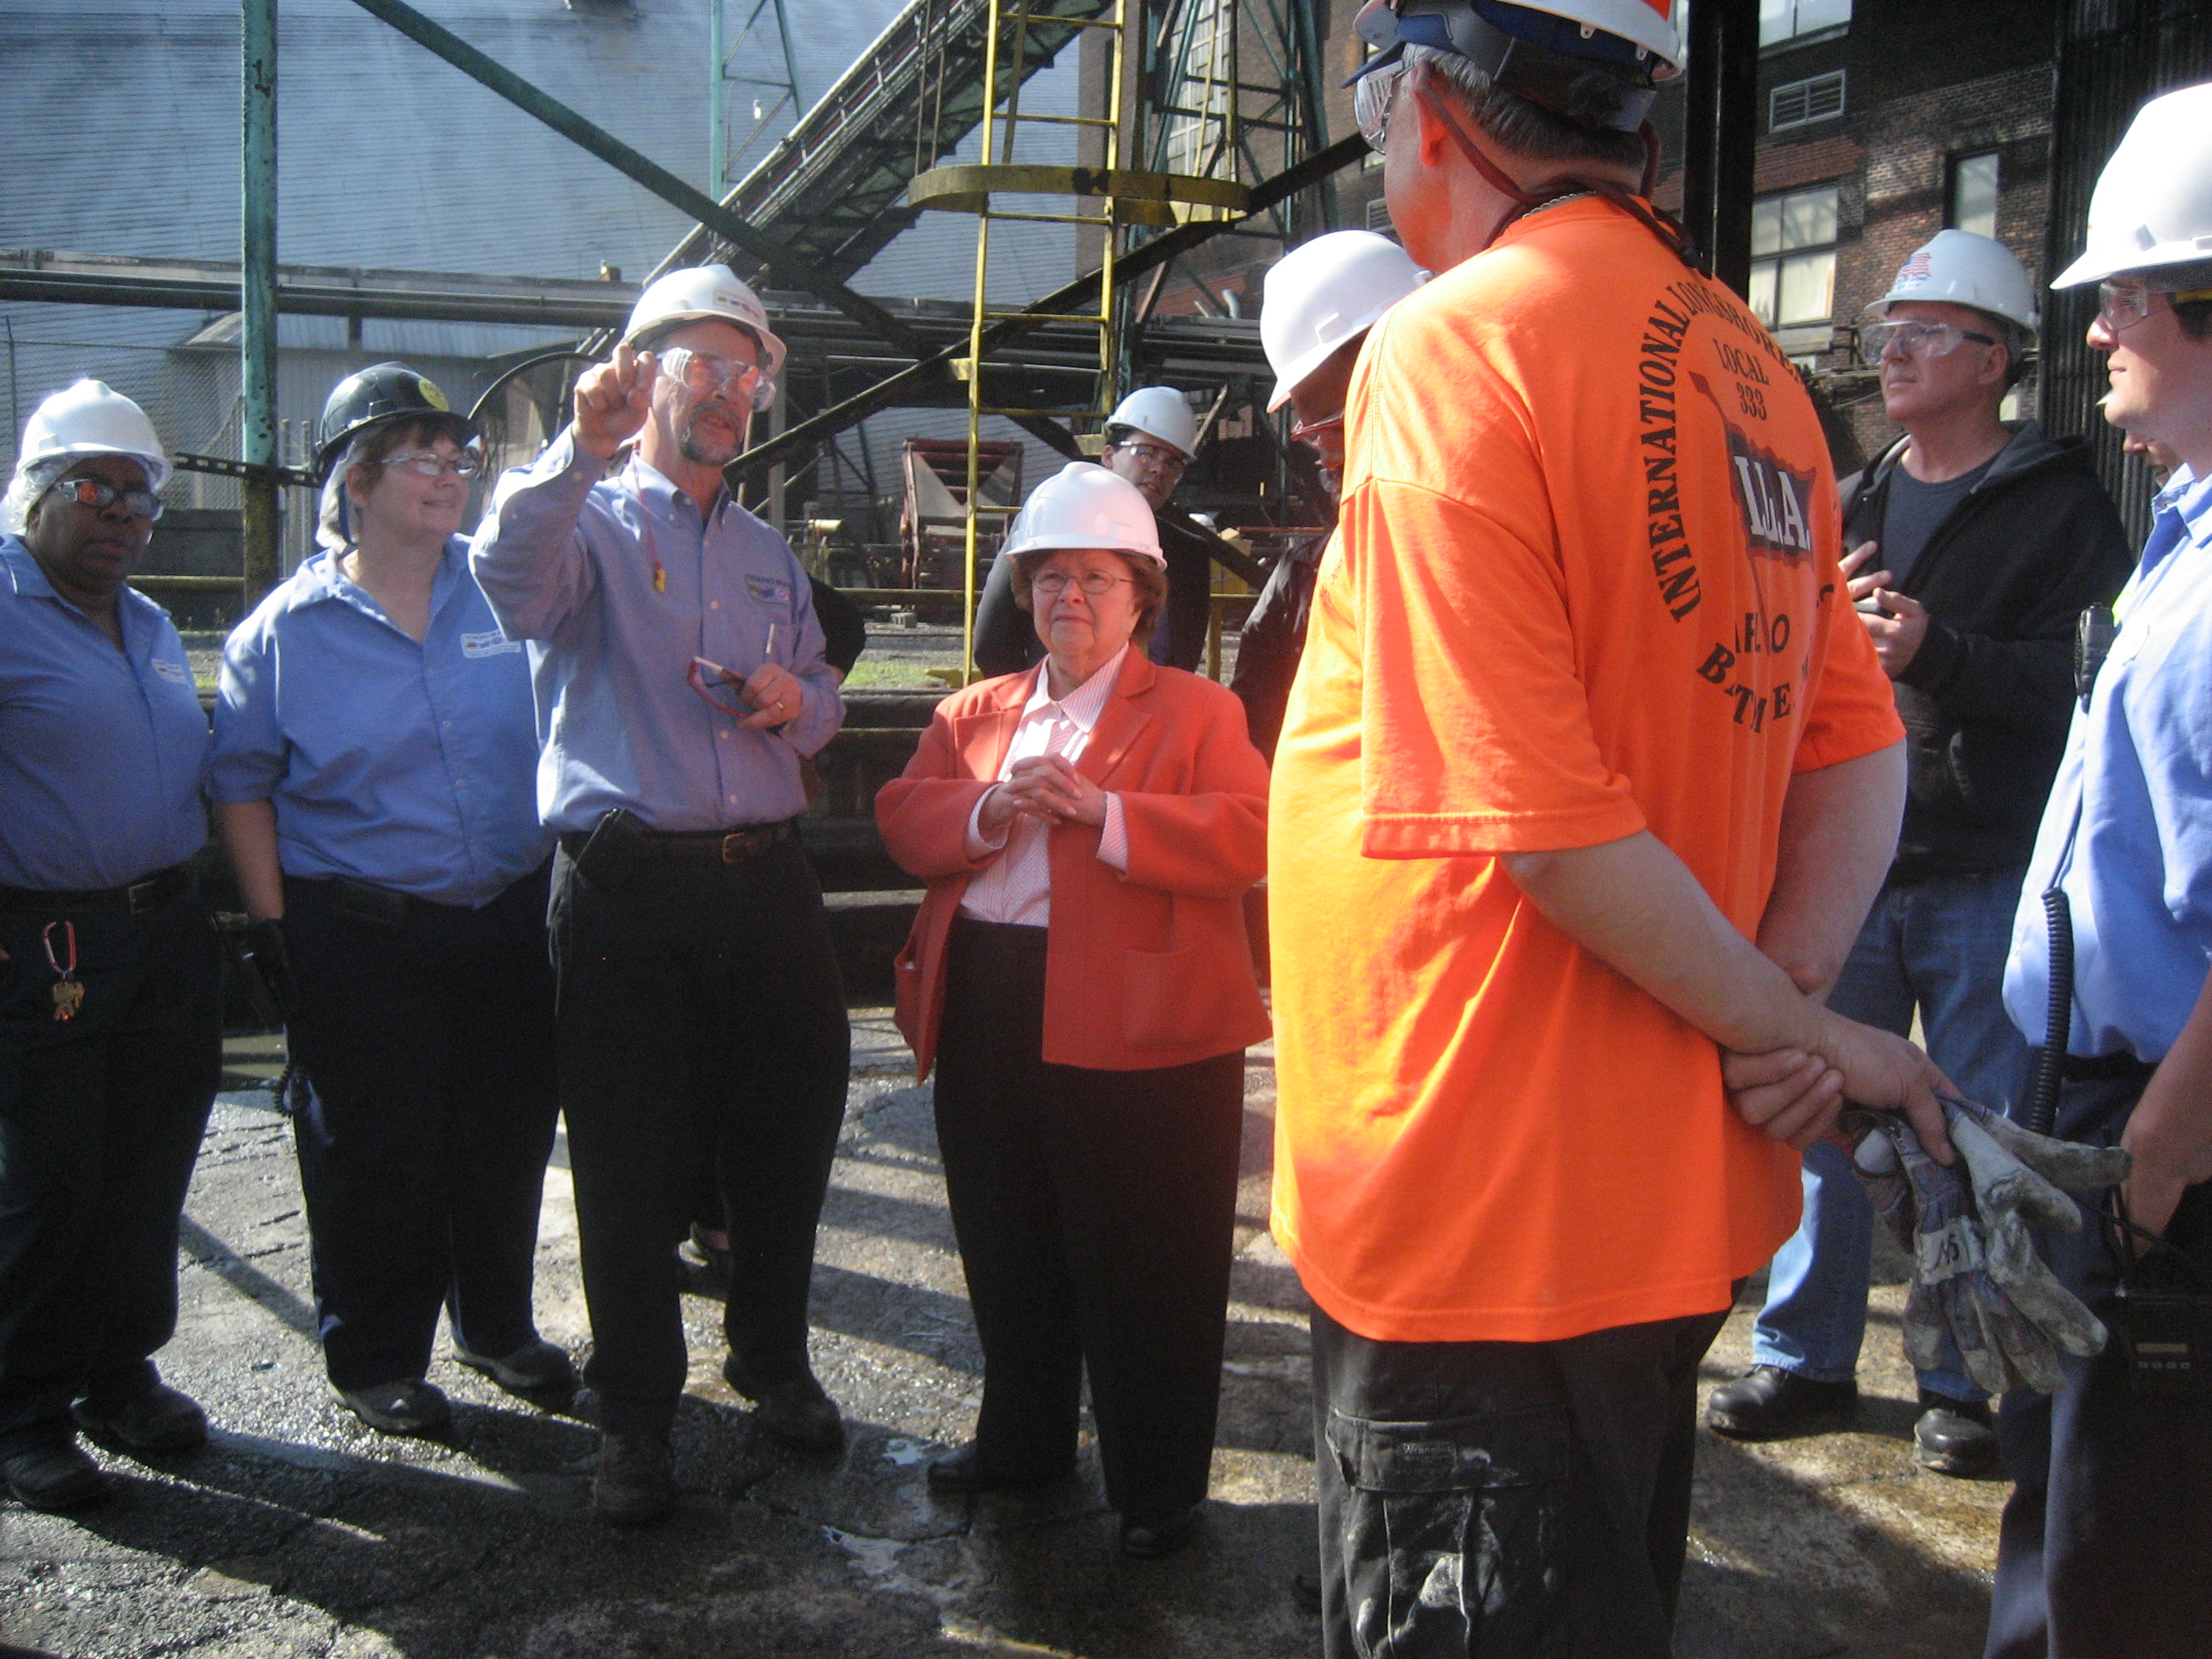 Mikulski Tours Domino Sugar in Baltimore to Support Manufacturing Jobs